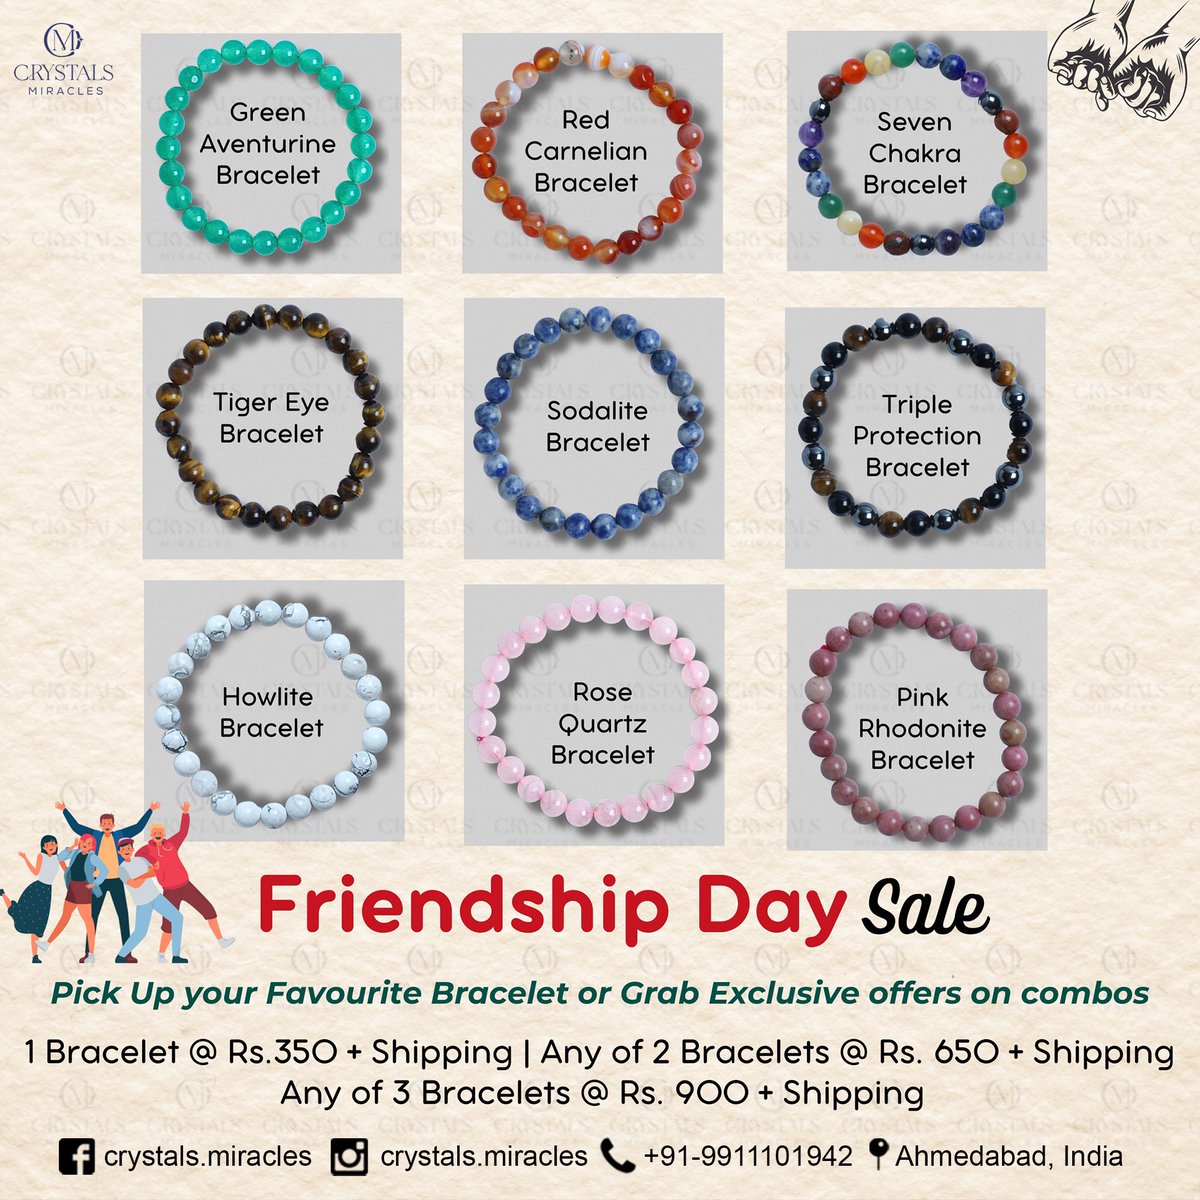 👭👬 Tag your besties who make your world shine, and show them your love and appreciation with a stunning crystal bracelet. #friendshipday #crystalbraceletsale #friendsforever #friendshipbond #jewelrysale #bestfriends #friendshipgoals #shopnow #crystallove #crystalenergy